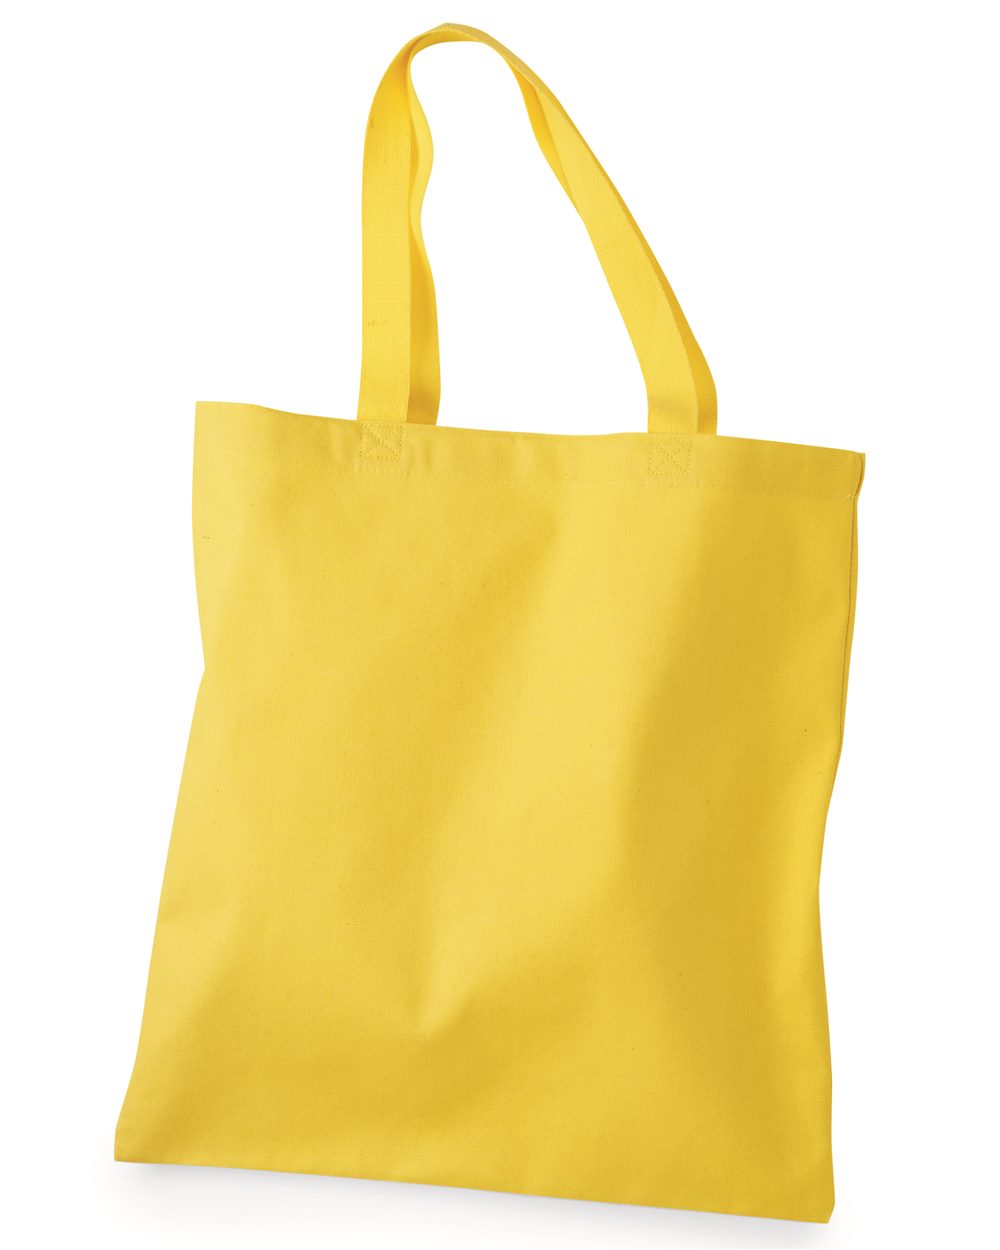 Q-Tees Q800 - Canvas Promotional Tote $1.88 - Bags